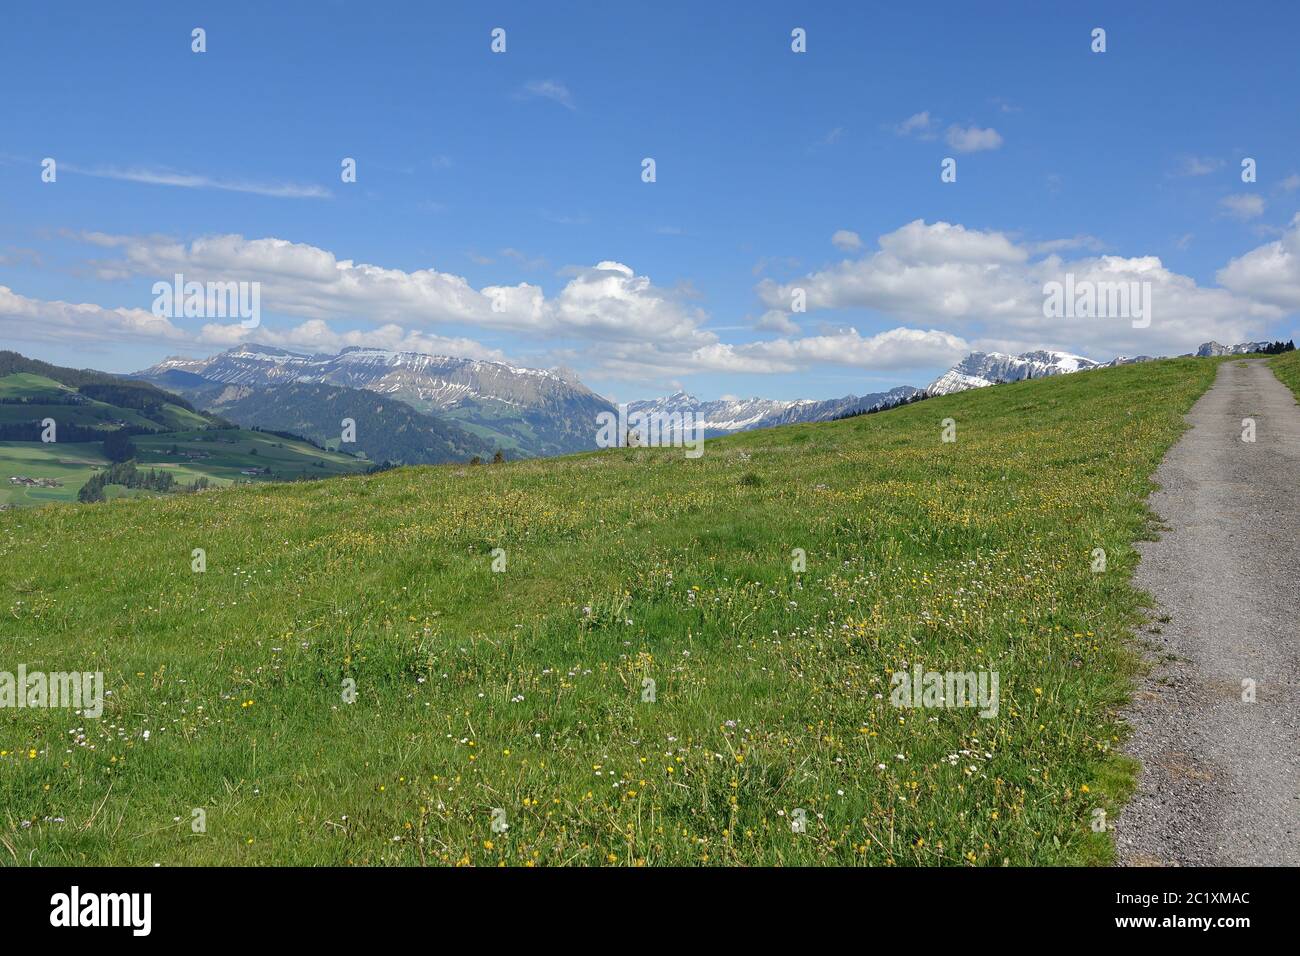 Landscape in Emmental / Switzerland with mountains and alpine meadows. Stock Photo